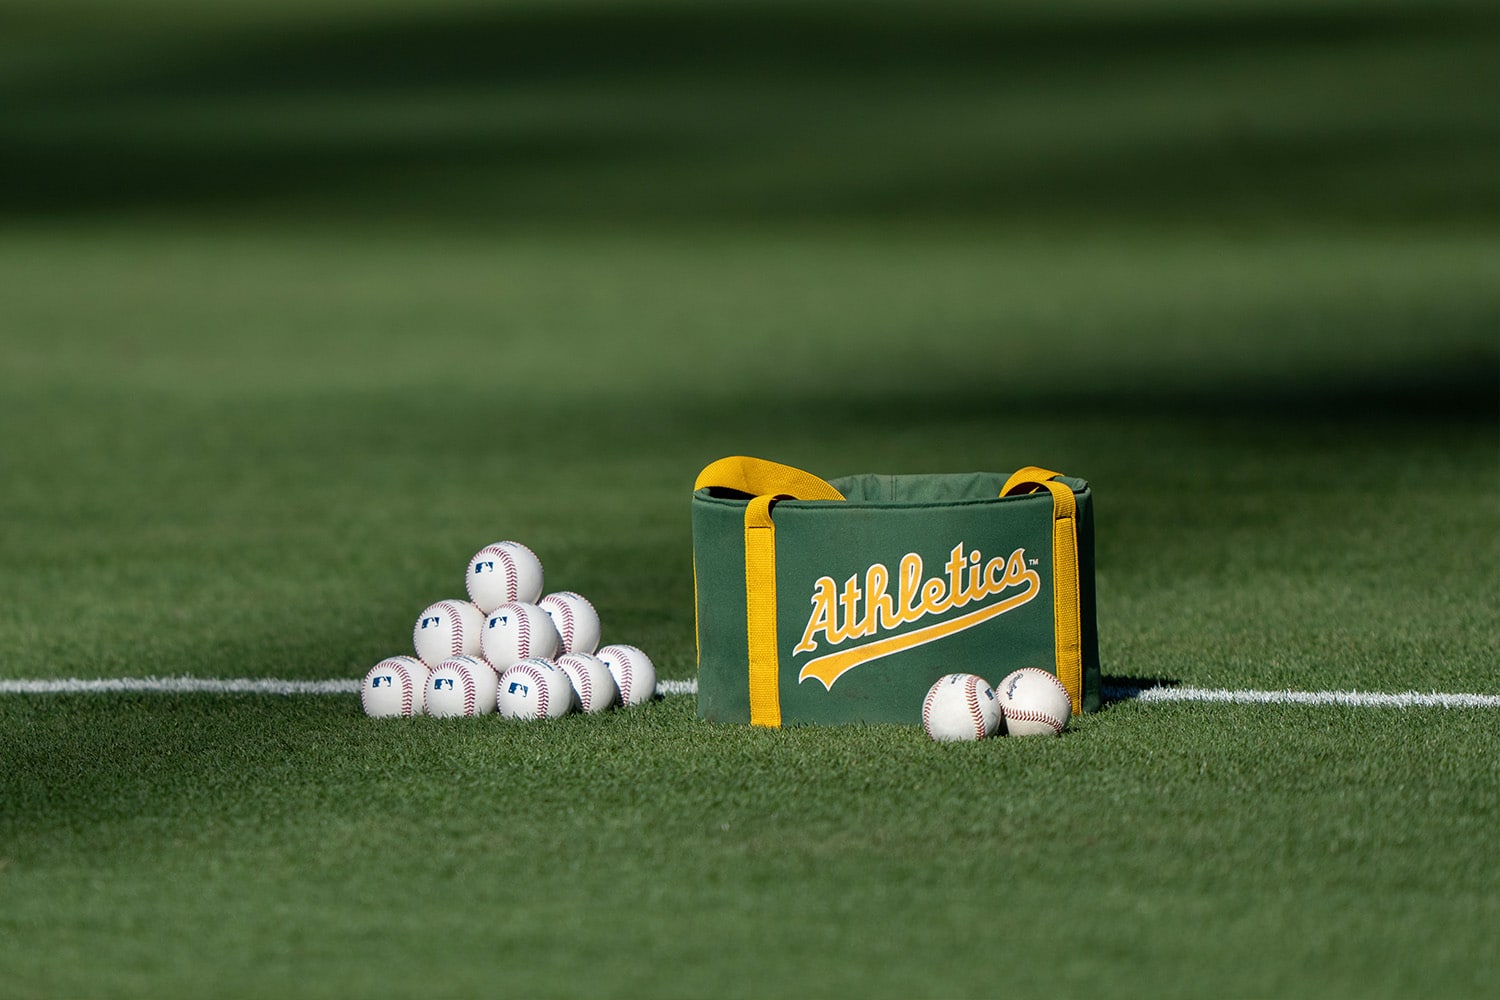 Baseball bag on field with Oakland Athletic's branding